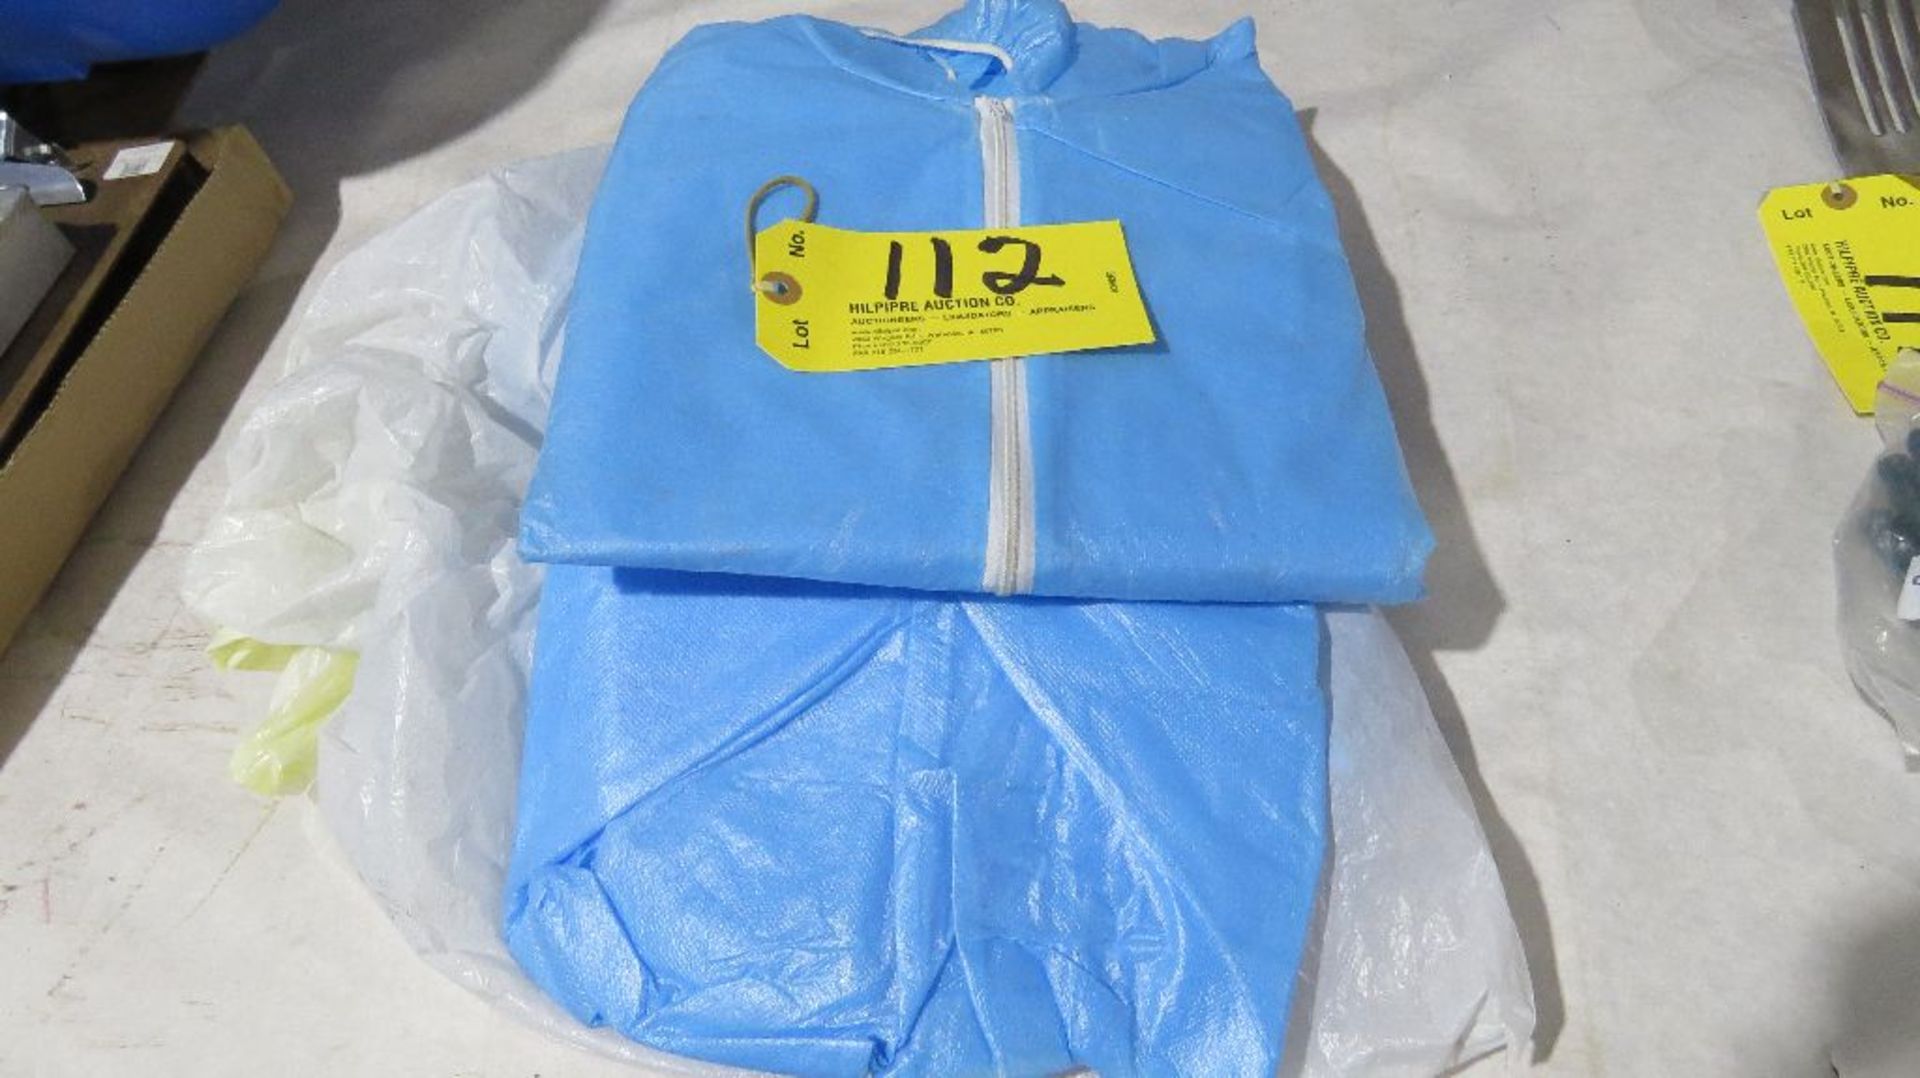 Particle protection suits overalls, size XXL.